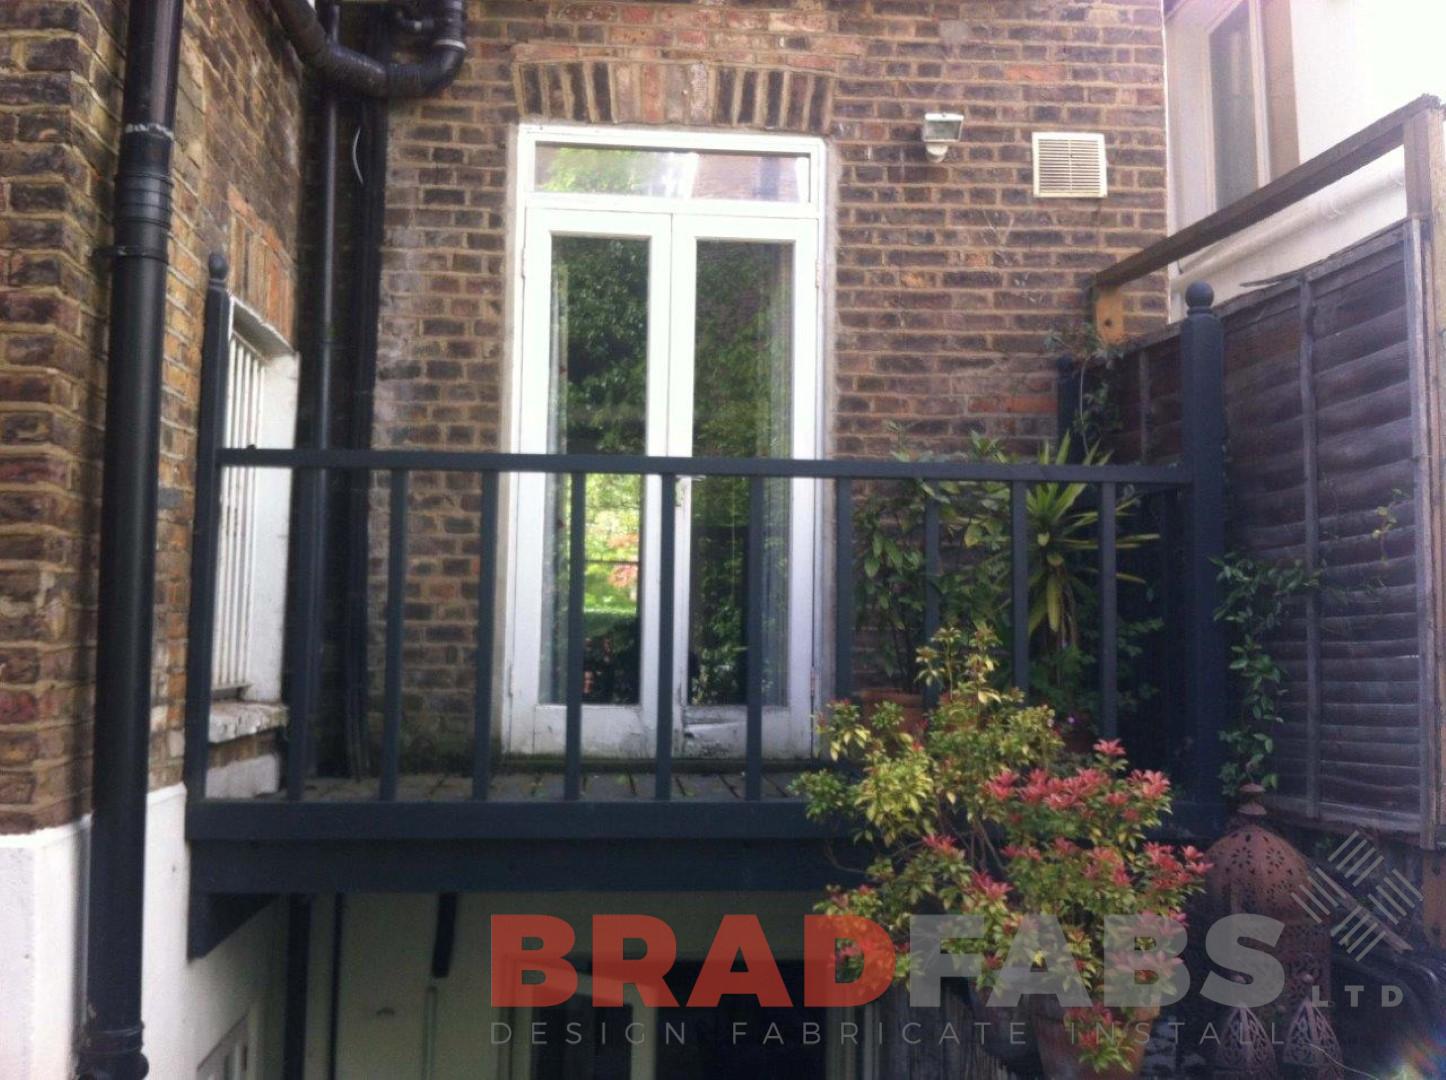 BRADFABS made these steel and glass balconies. UK